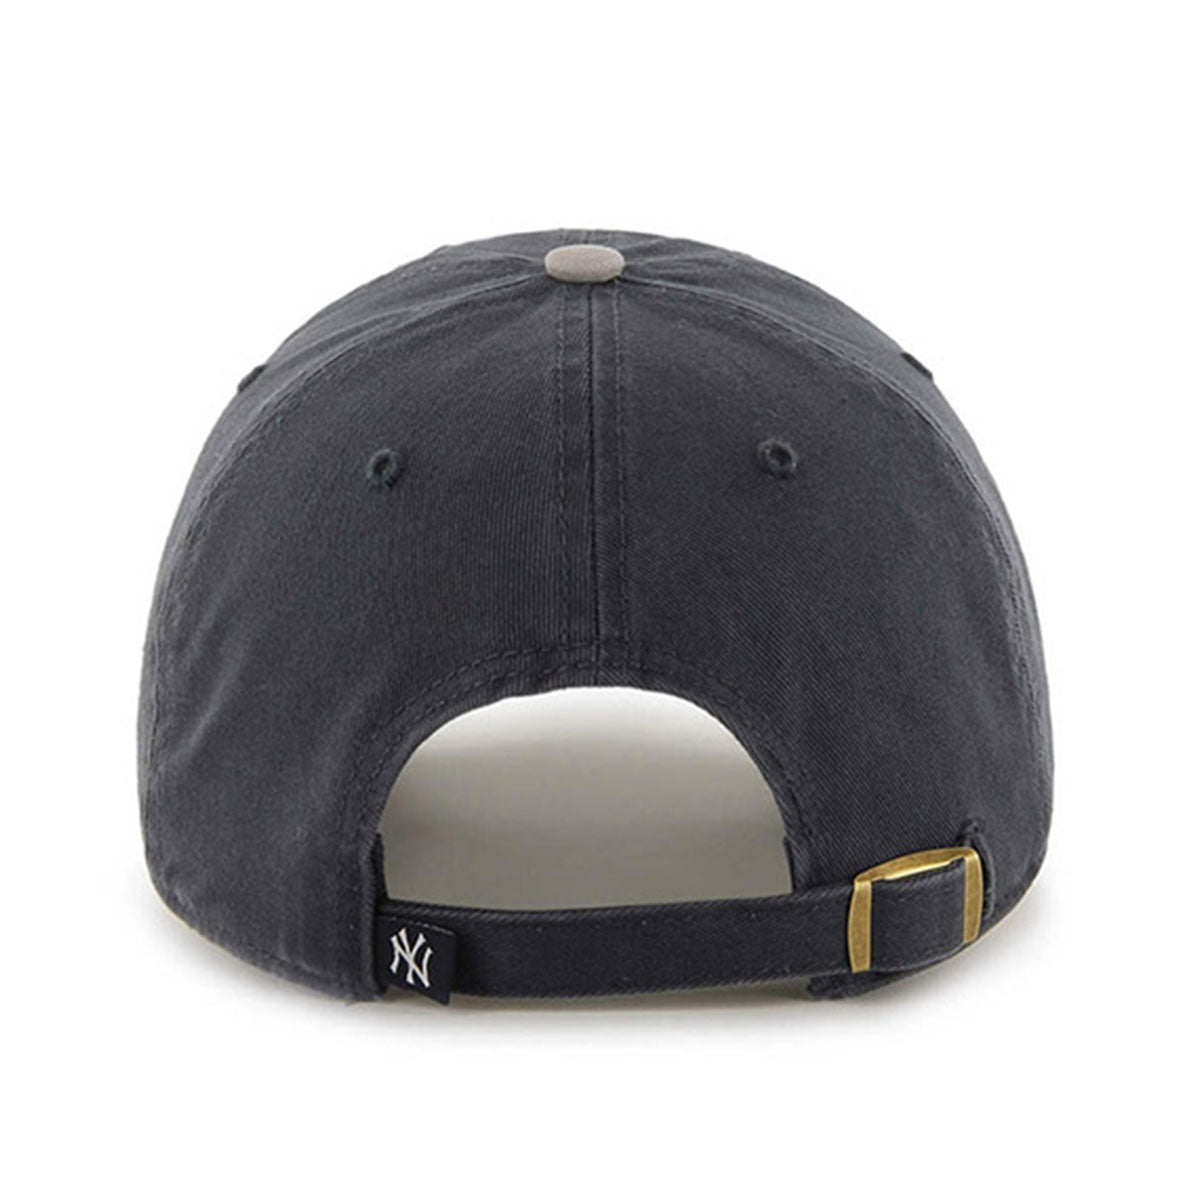 ’47 BRAND YANKEES ’47 CLEAN UP TWO TONE NAVY/GRAY 【RGW17GWSRP】